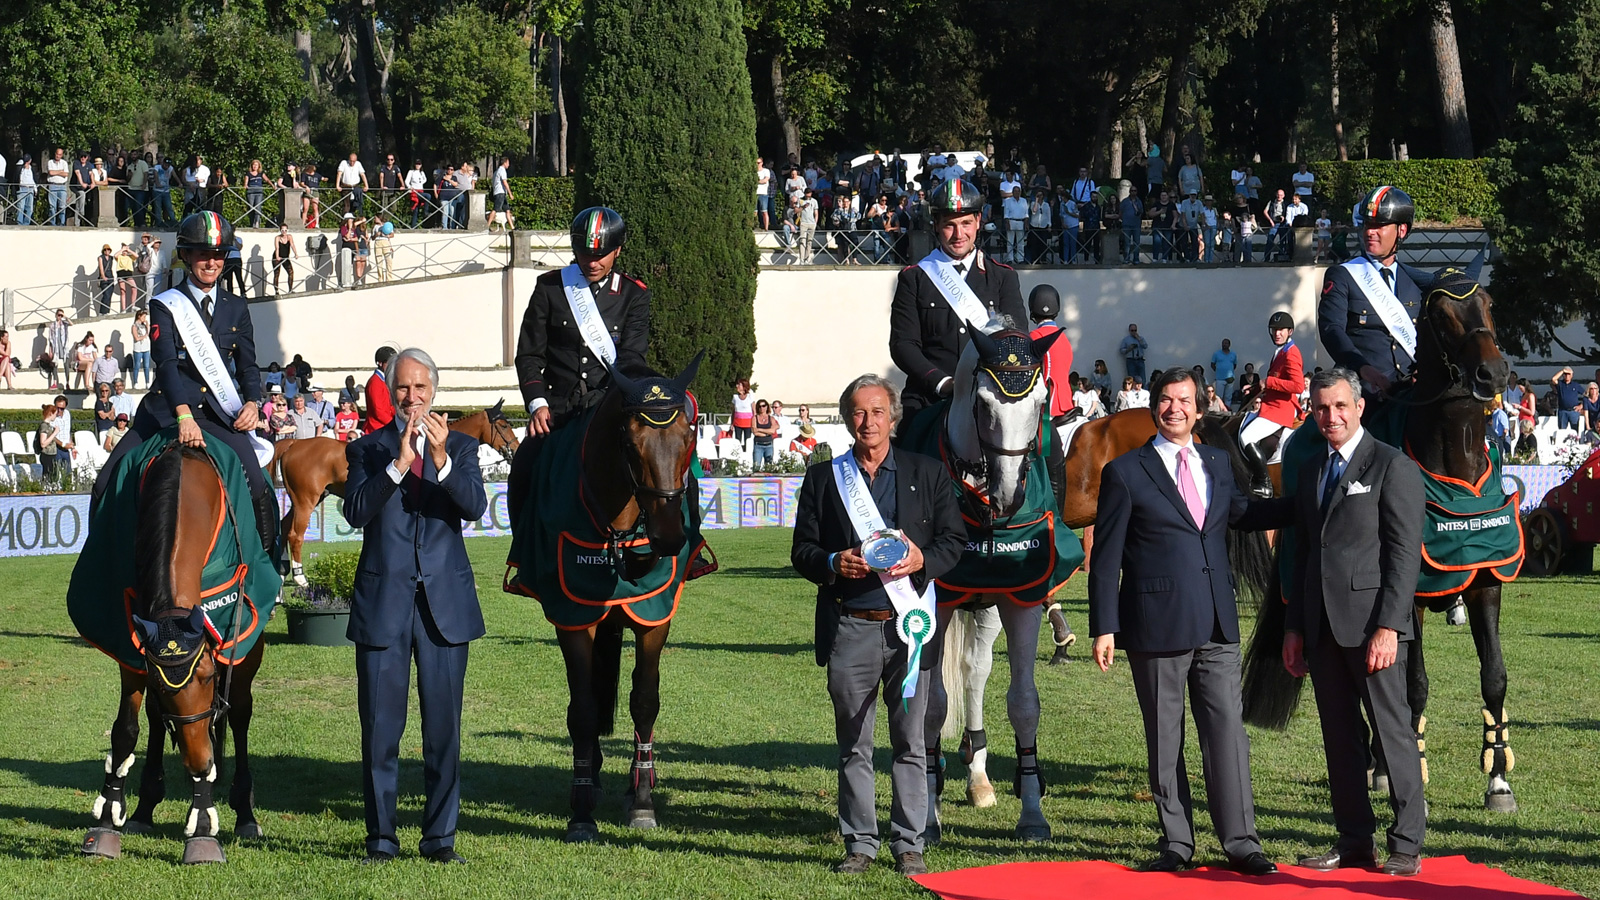 images/2019/Prize-Giving_Nations-Cup_PhSimoneFerraro-CONI.jpg